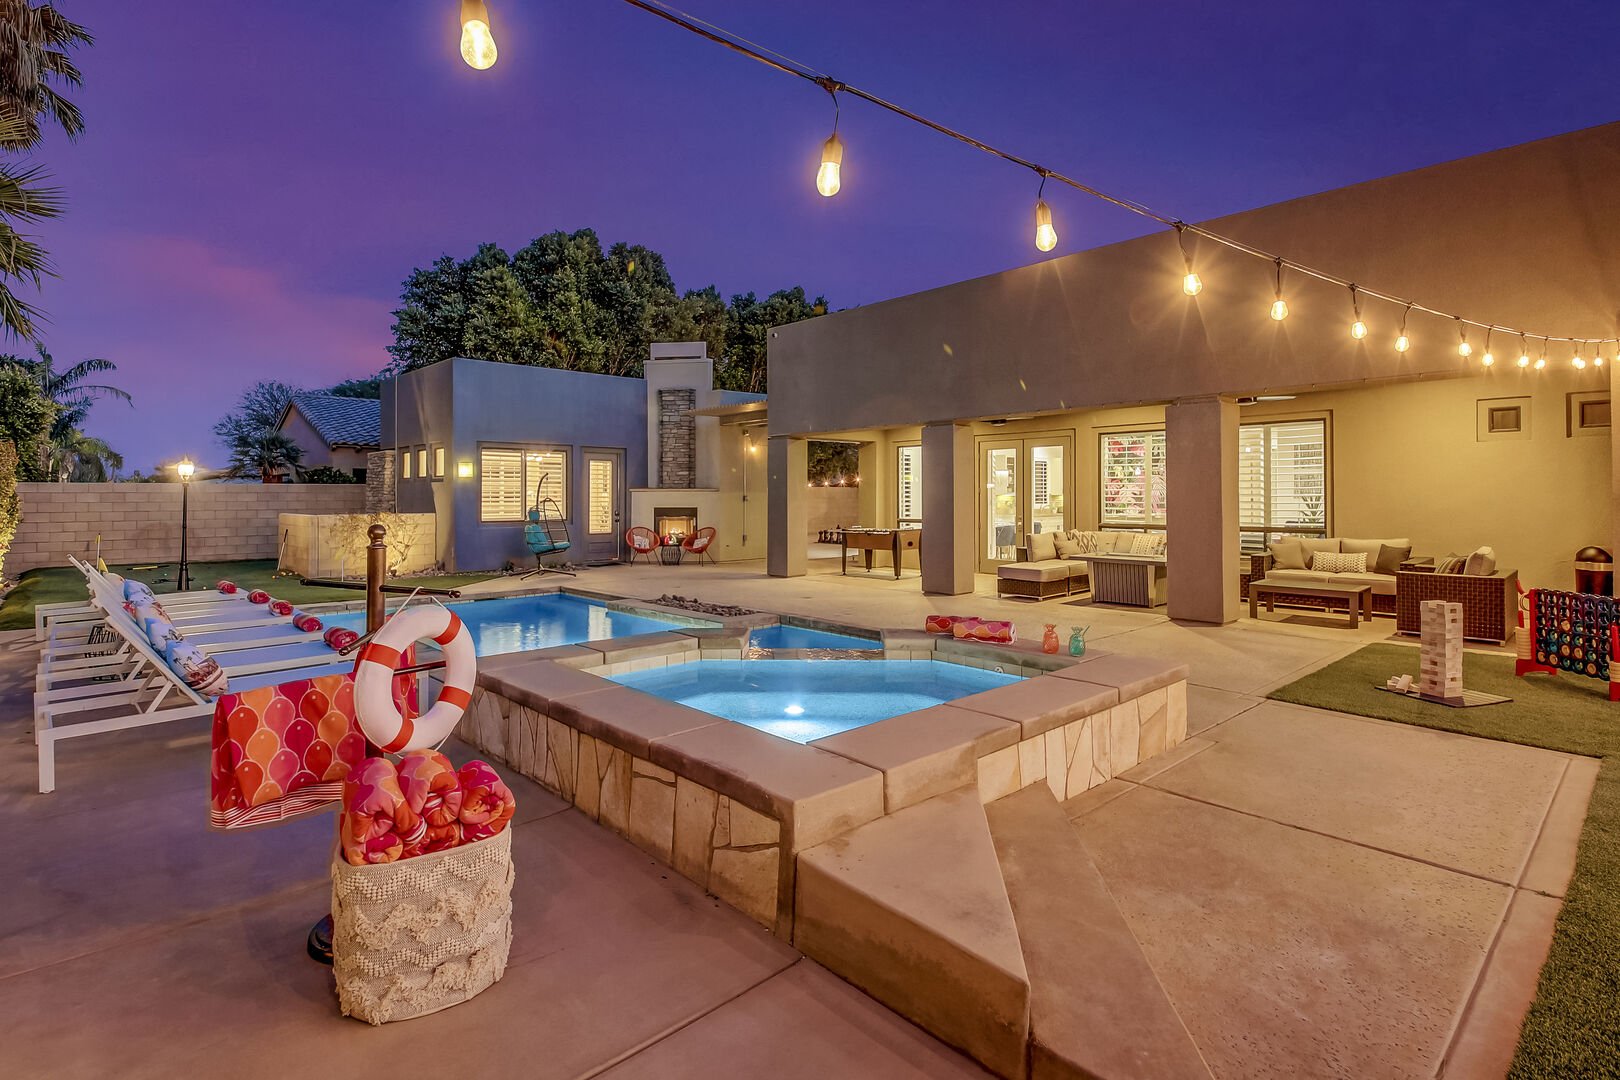 This backyard will have you wishing you booked a longer stay!